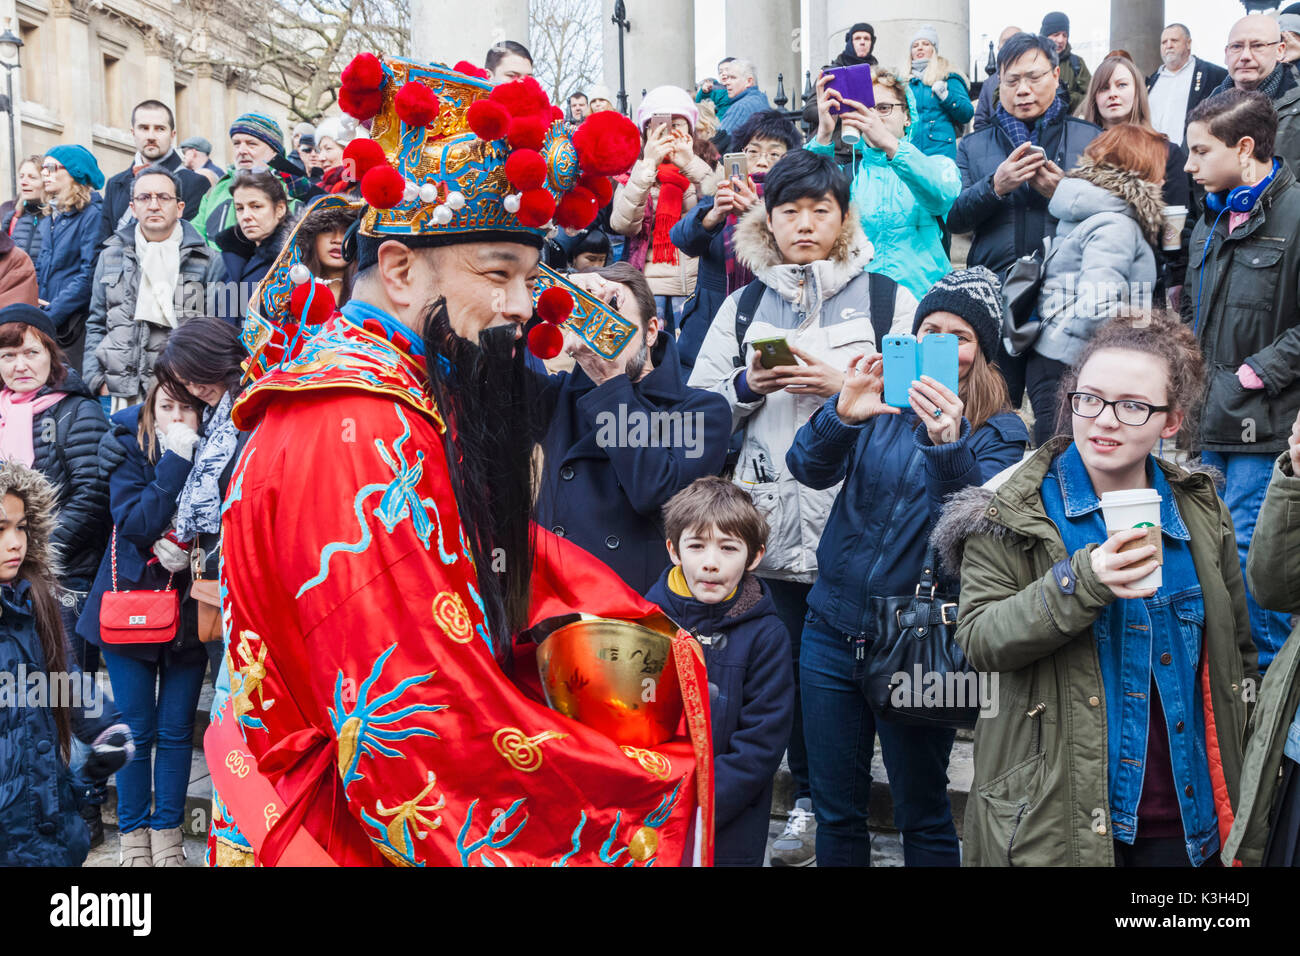 England, London, Chinatown, Chinese New Year Parade, Participant Dressed as Lucky God and Crowd of Spectators Stock Photo